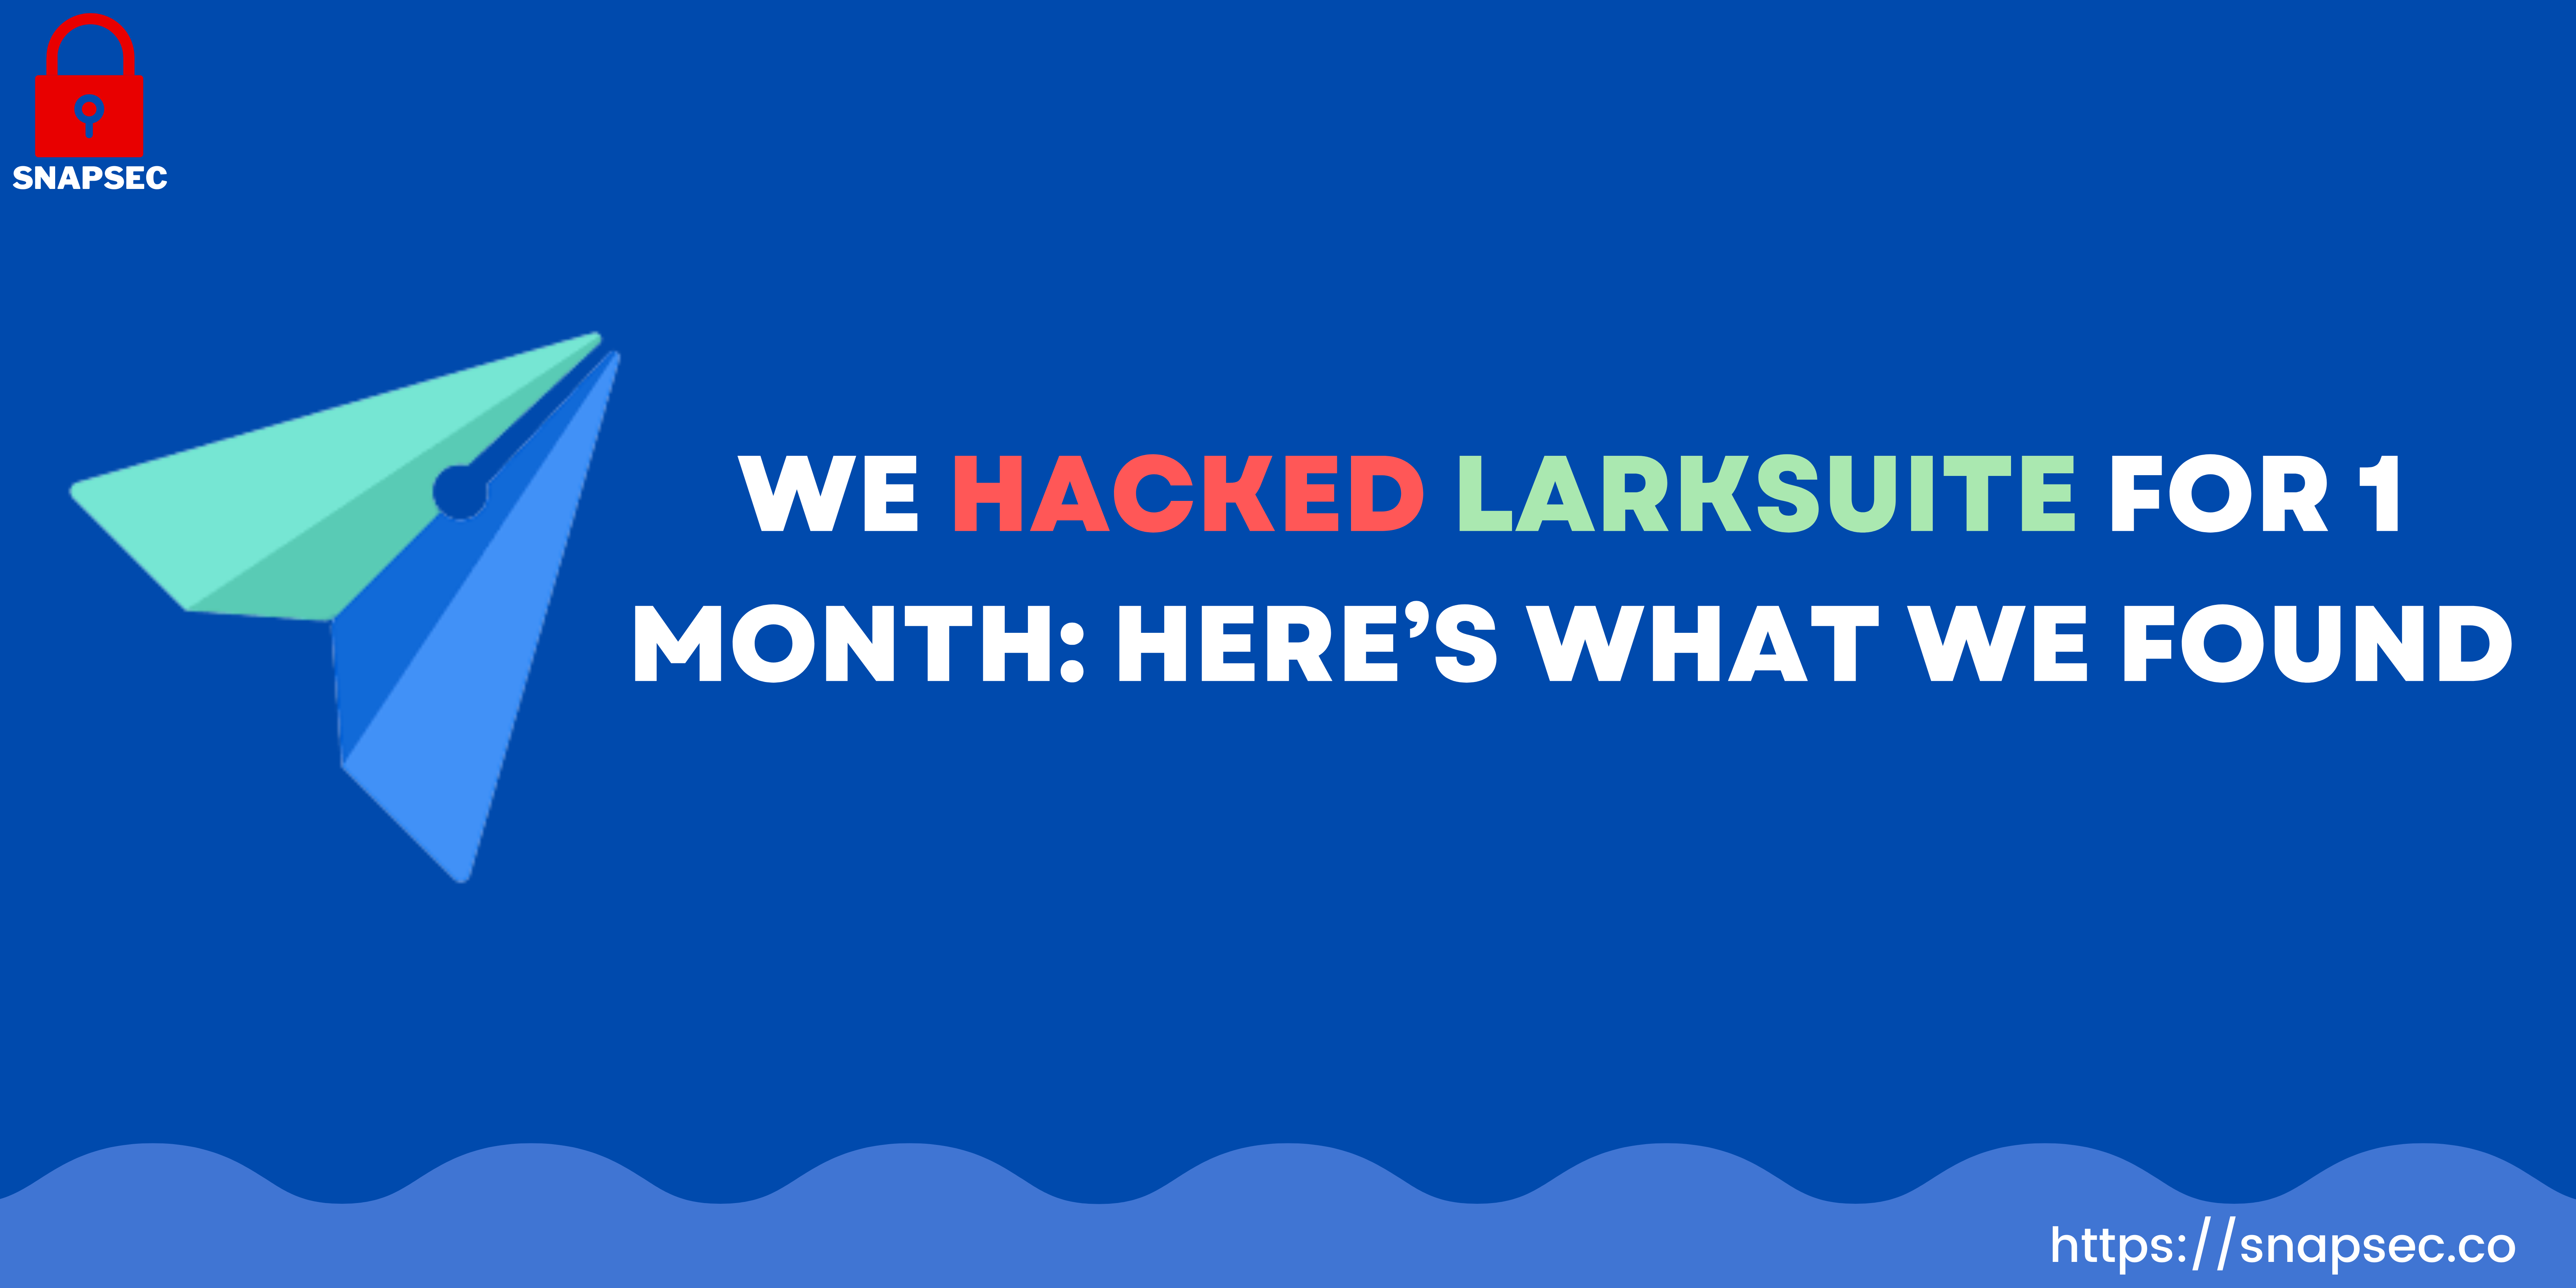 We Hacked Larksuite For 1 month and Here is what we found